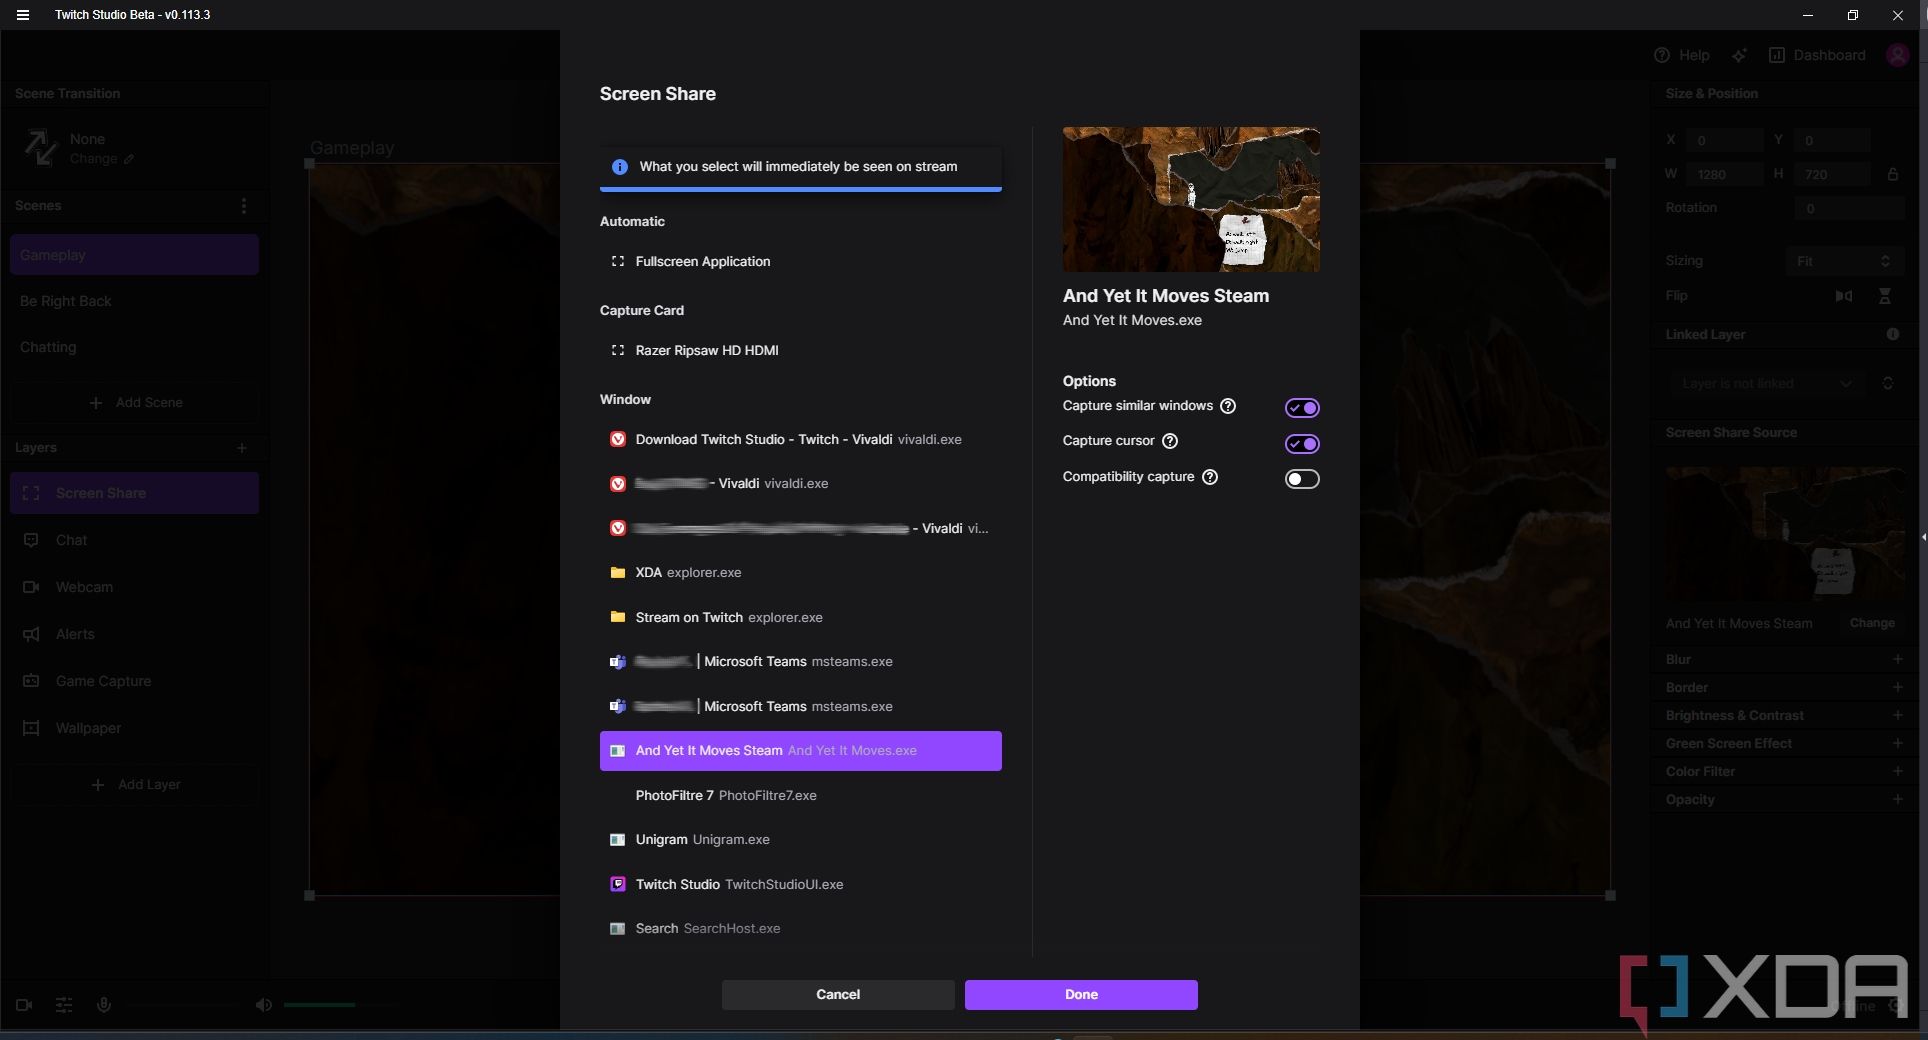 Screenshot of Twitch Studio when choosing a screen share source, including different monitors, apps, and capture cards